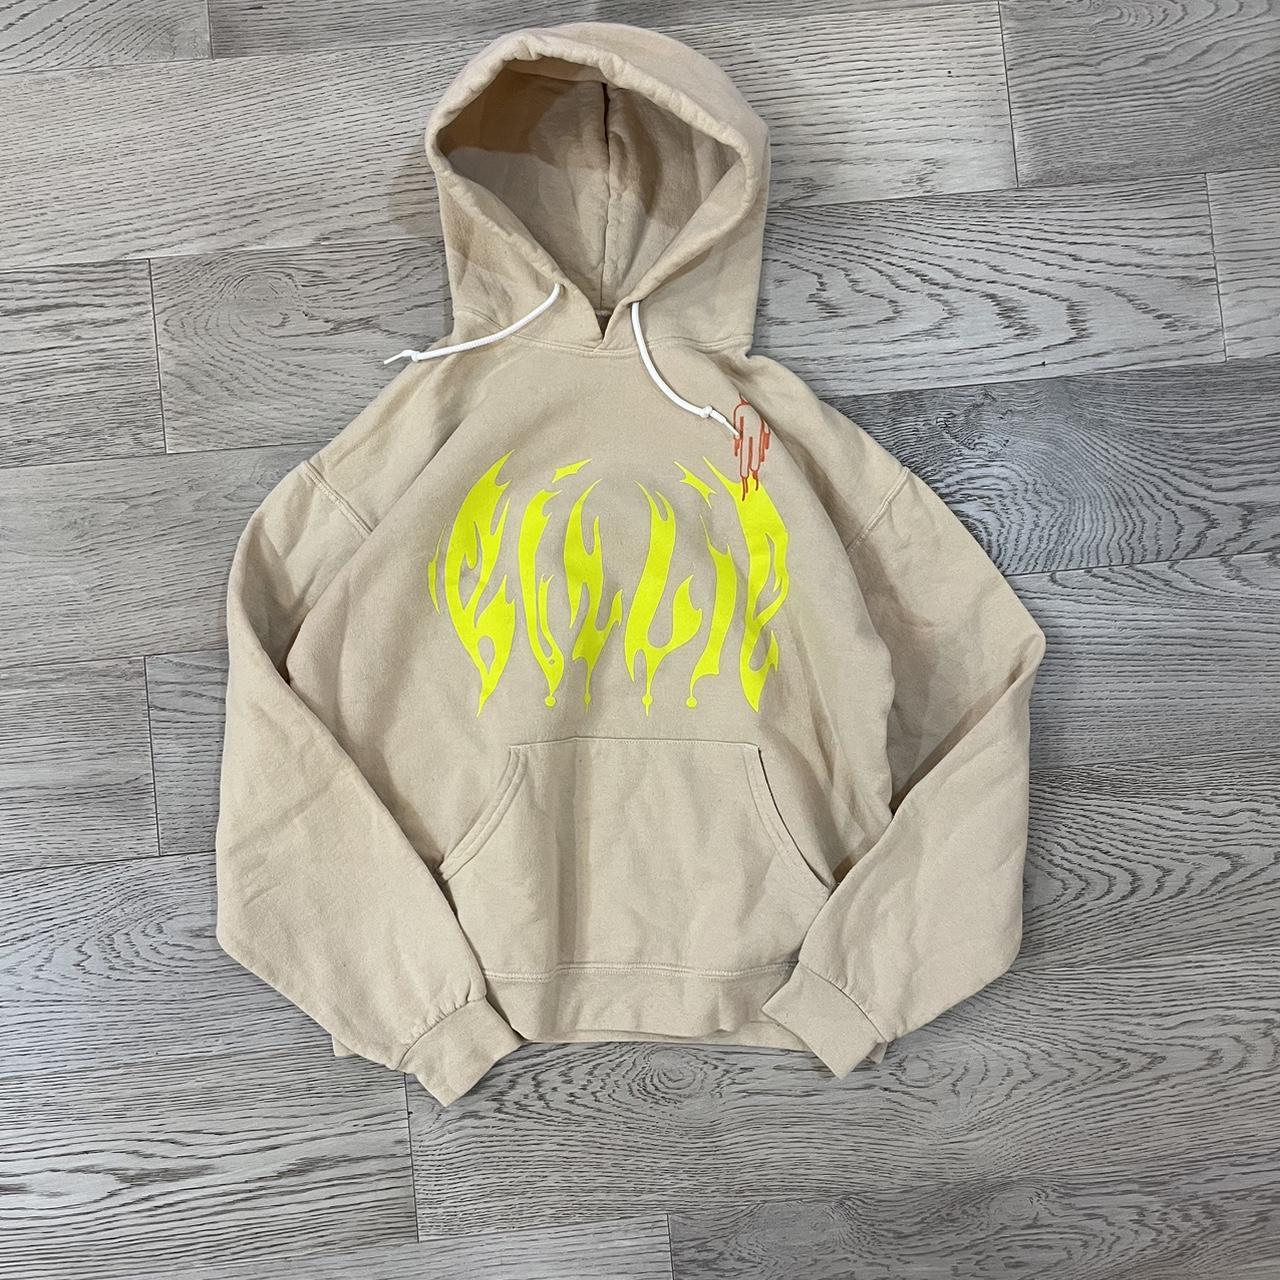 item listed by hennysales